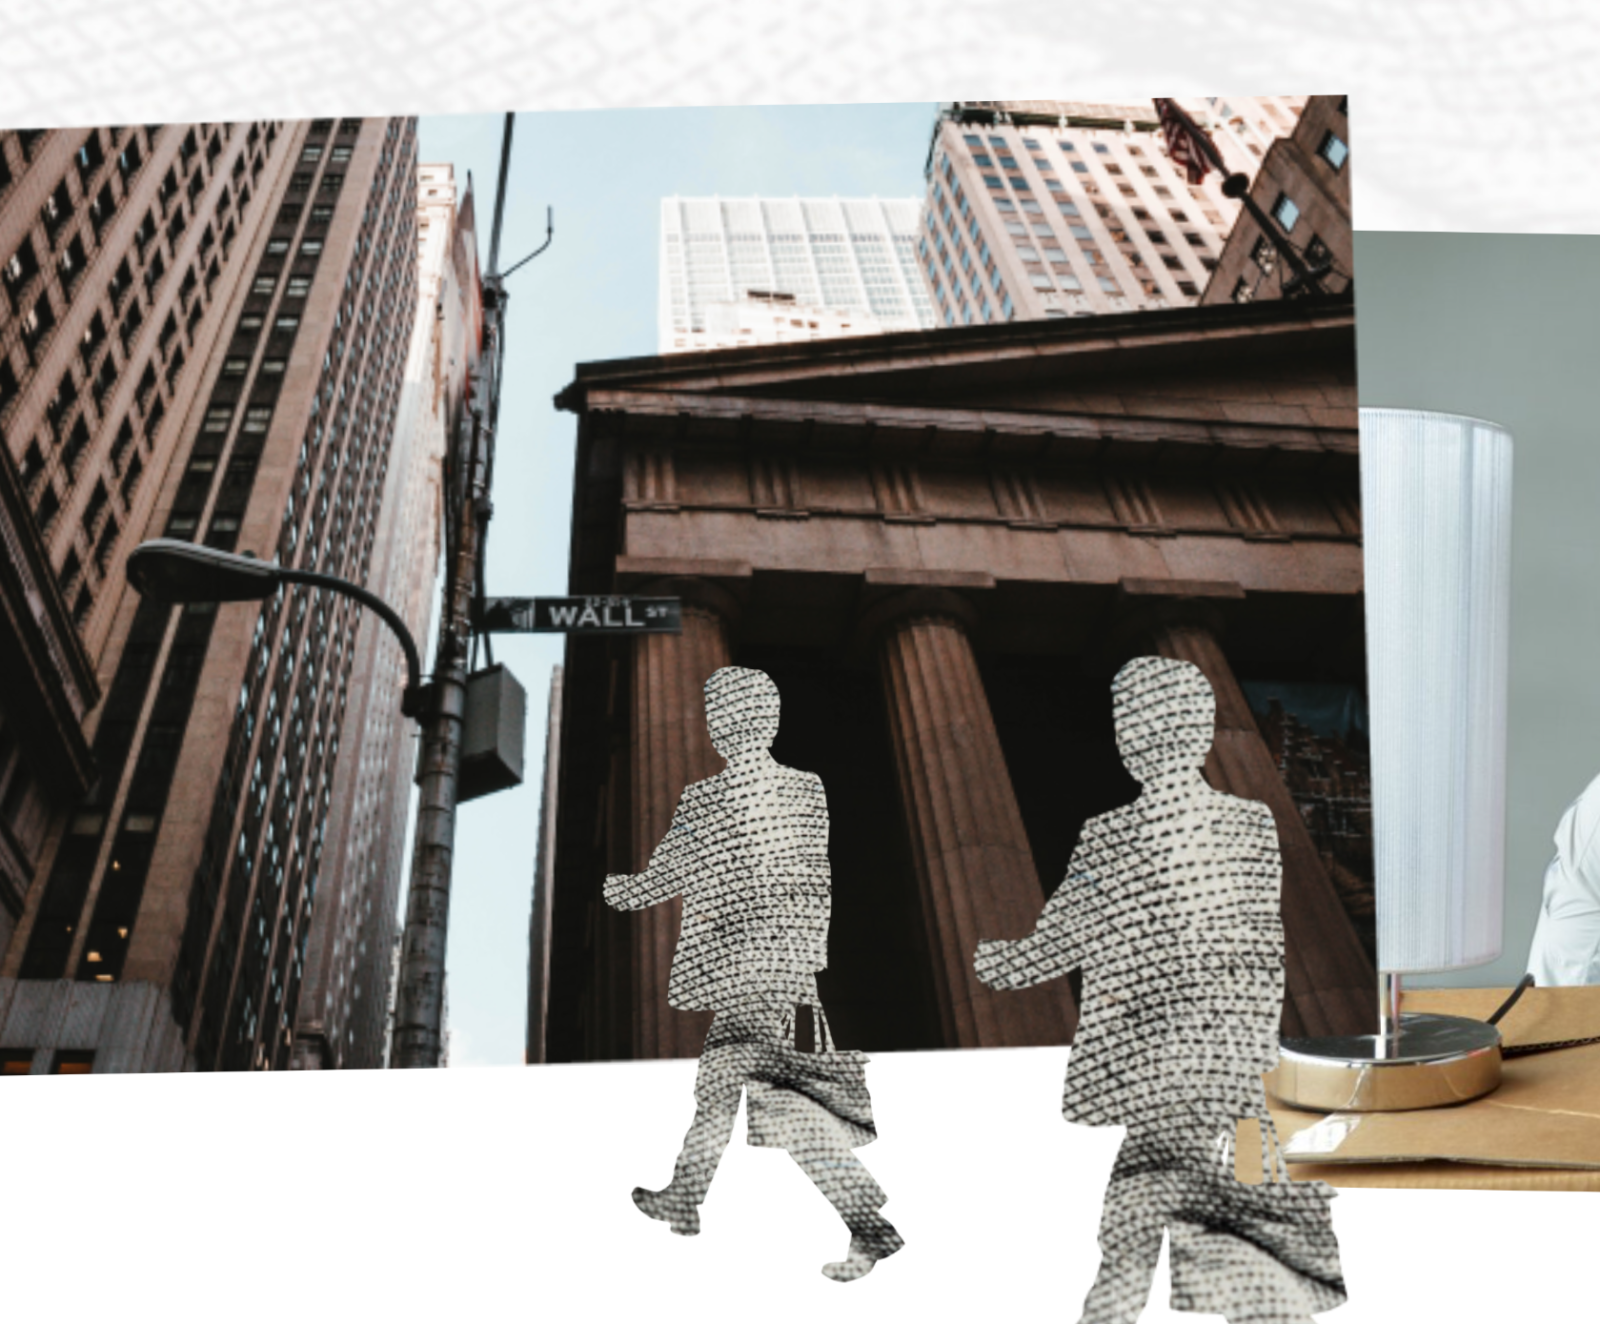 collage of images: Wall Street, two business men, and someone at work